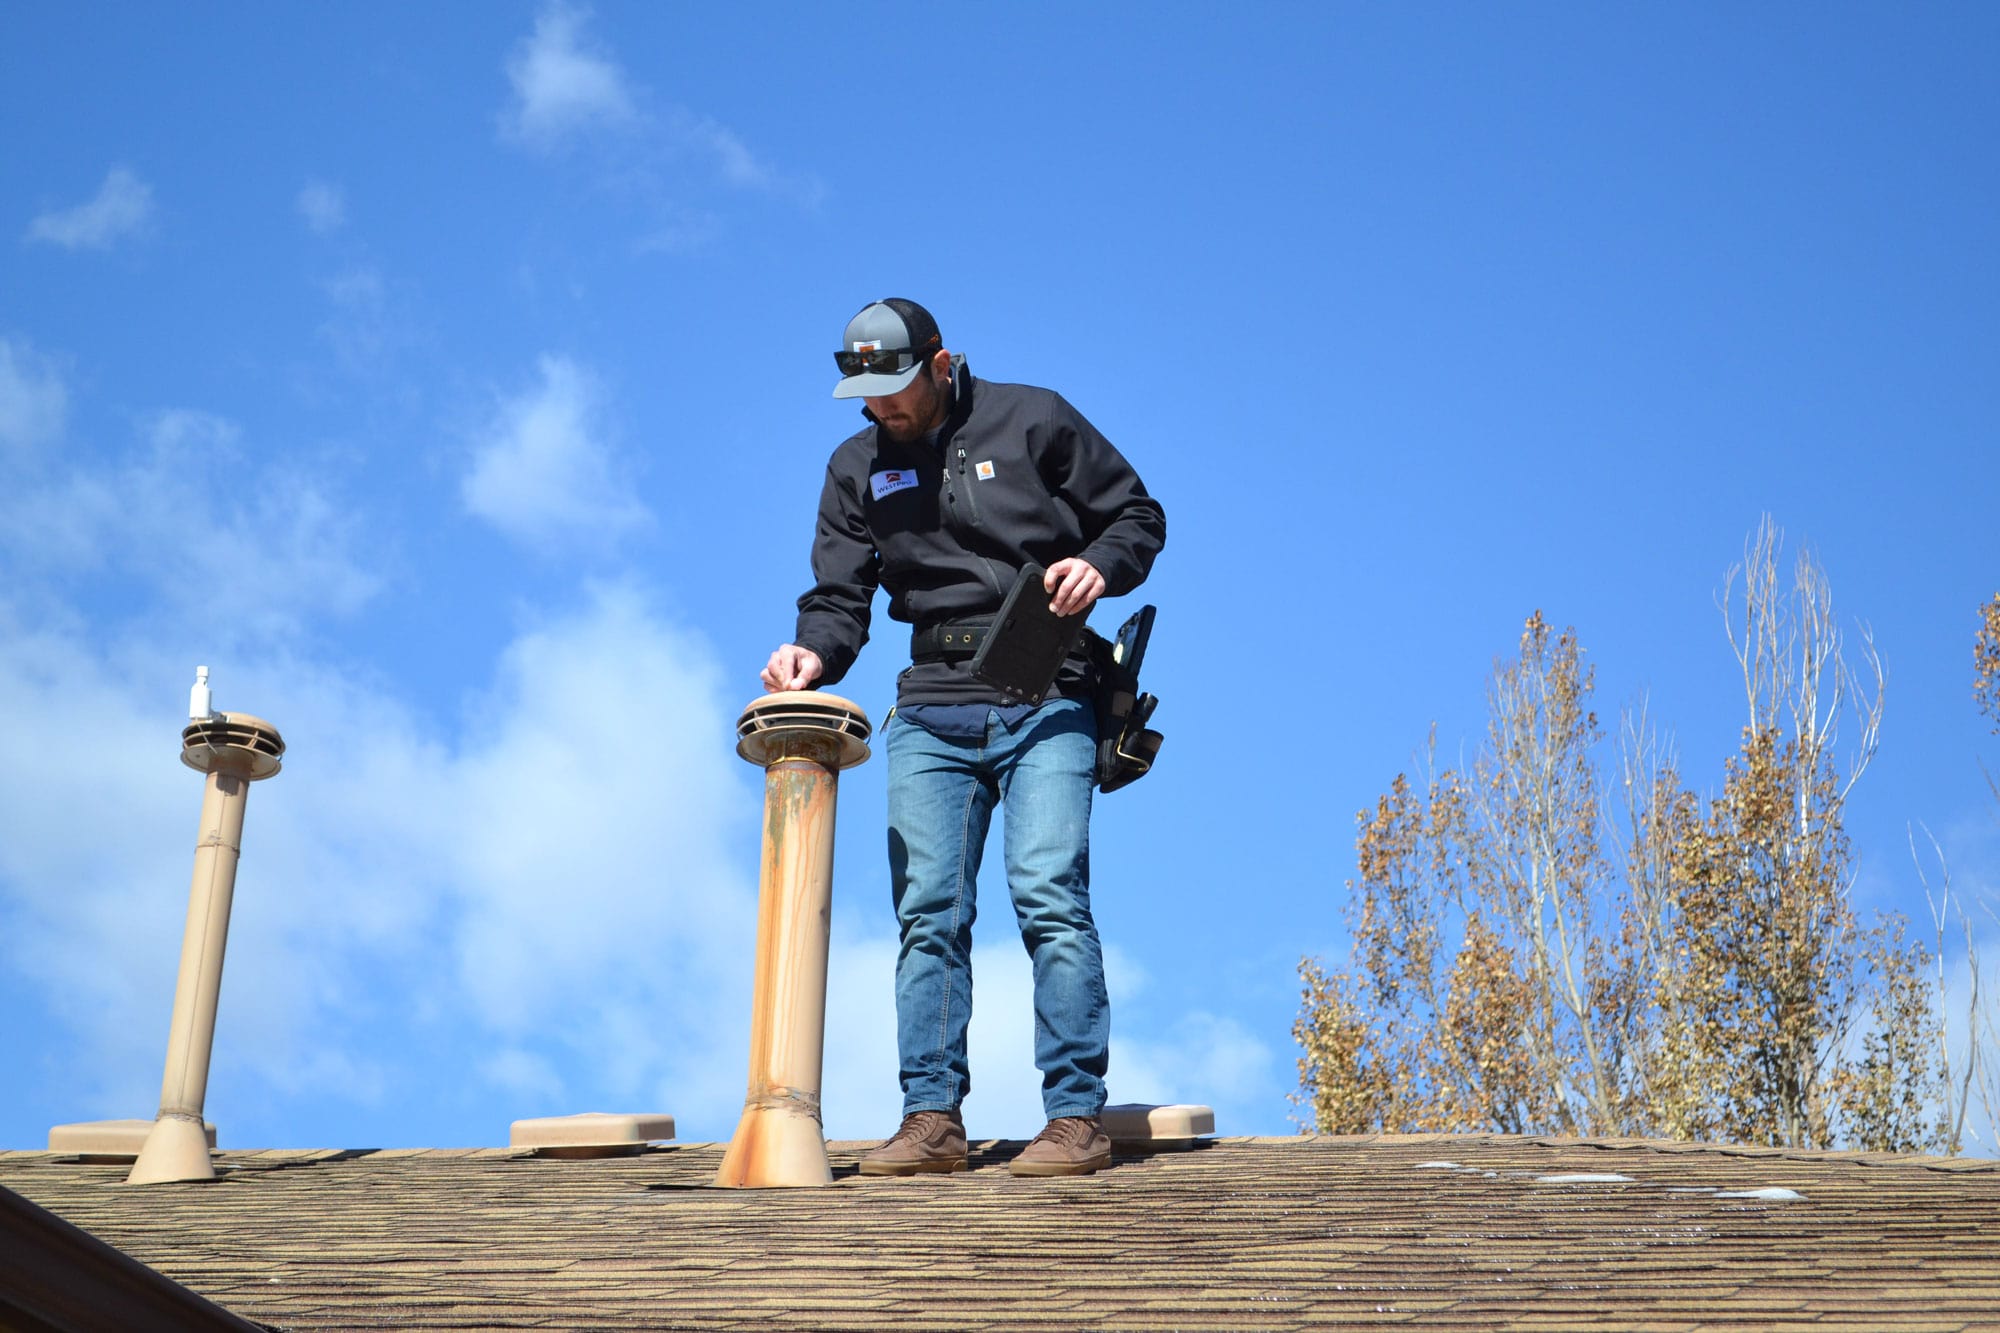 WestPro contractor on a Colorado Roof during a shingles repair job